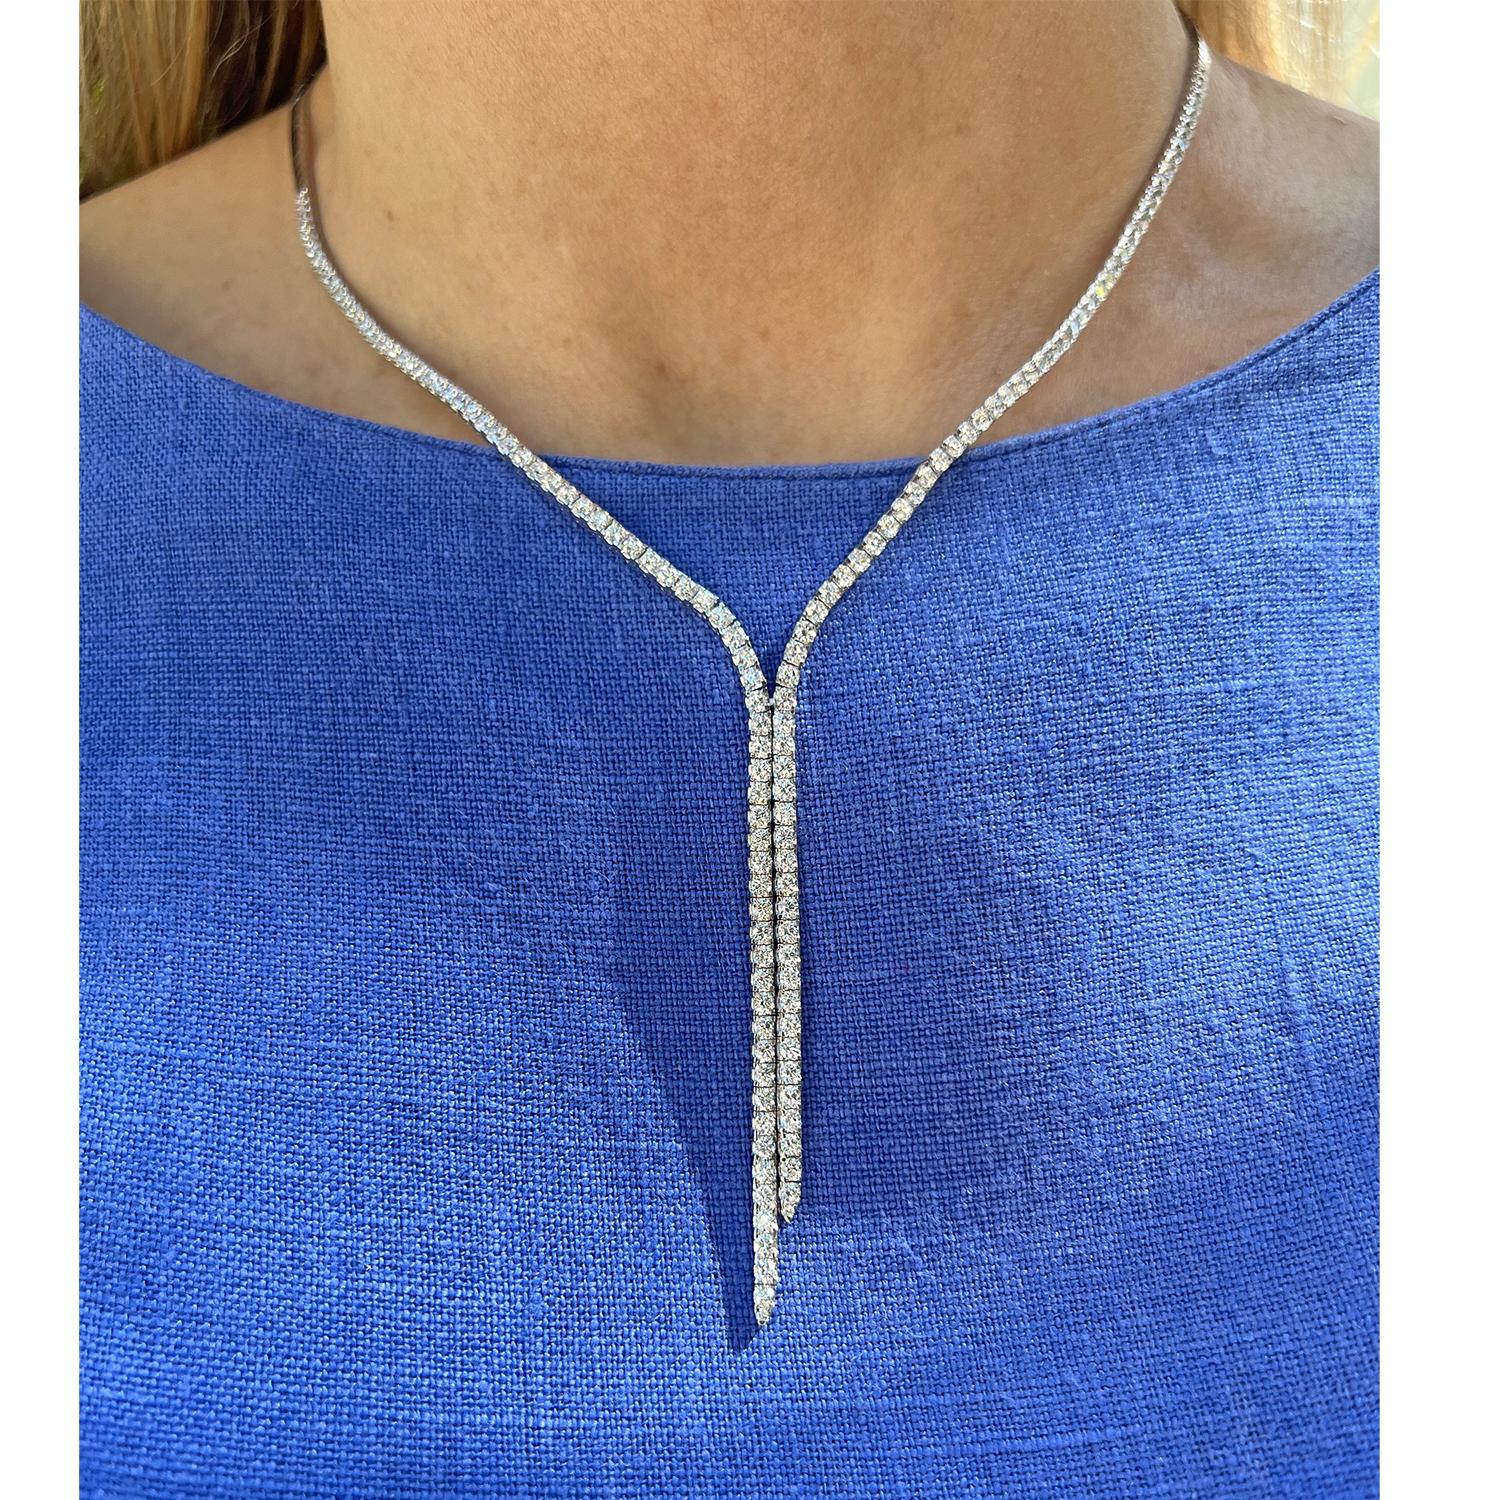 Diamond lariat necklace in polished 18k white gold, featuring 144 round brilliant-cut diamonds weighing 4.80 total carats.  Diamonds are G-H color and VS1-VS2 clarity.  Back half of the necklace is a polished flat link design.  Hidden clasp with